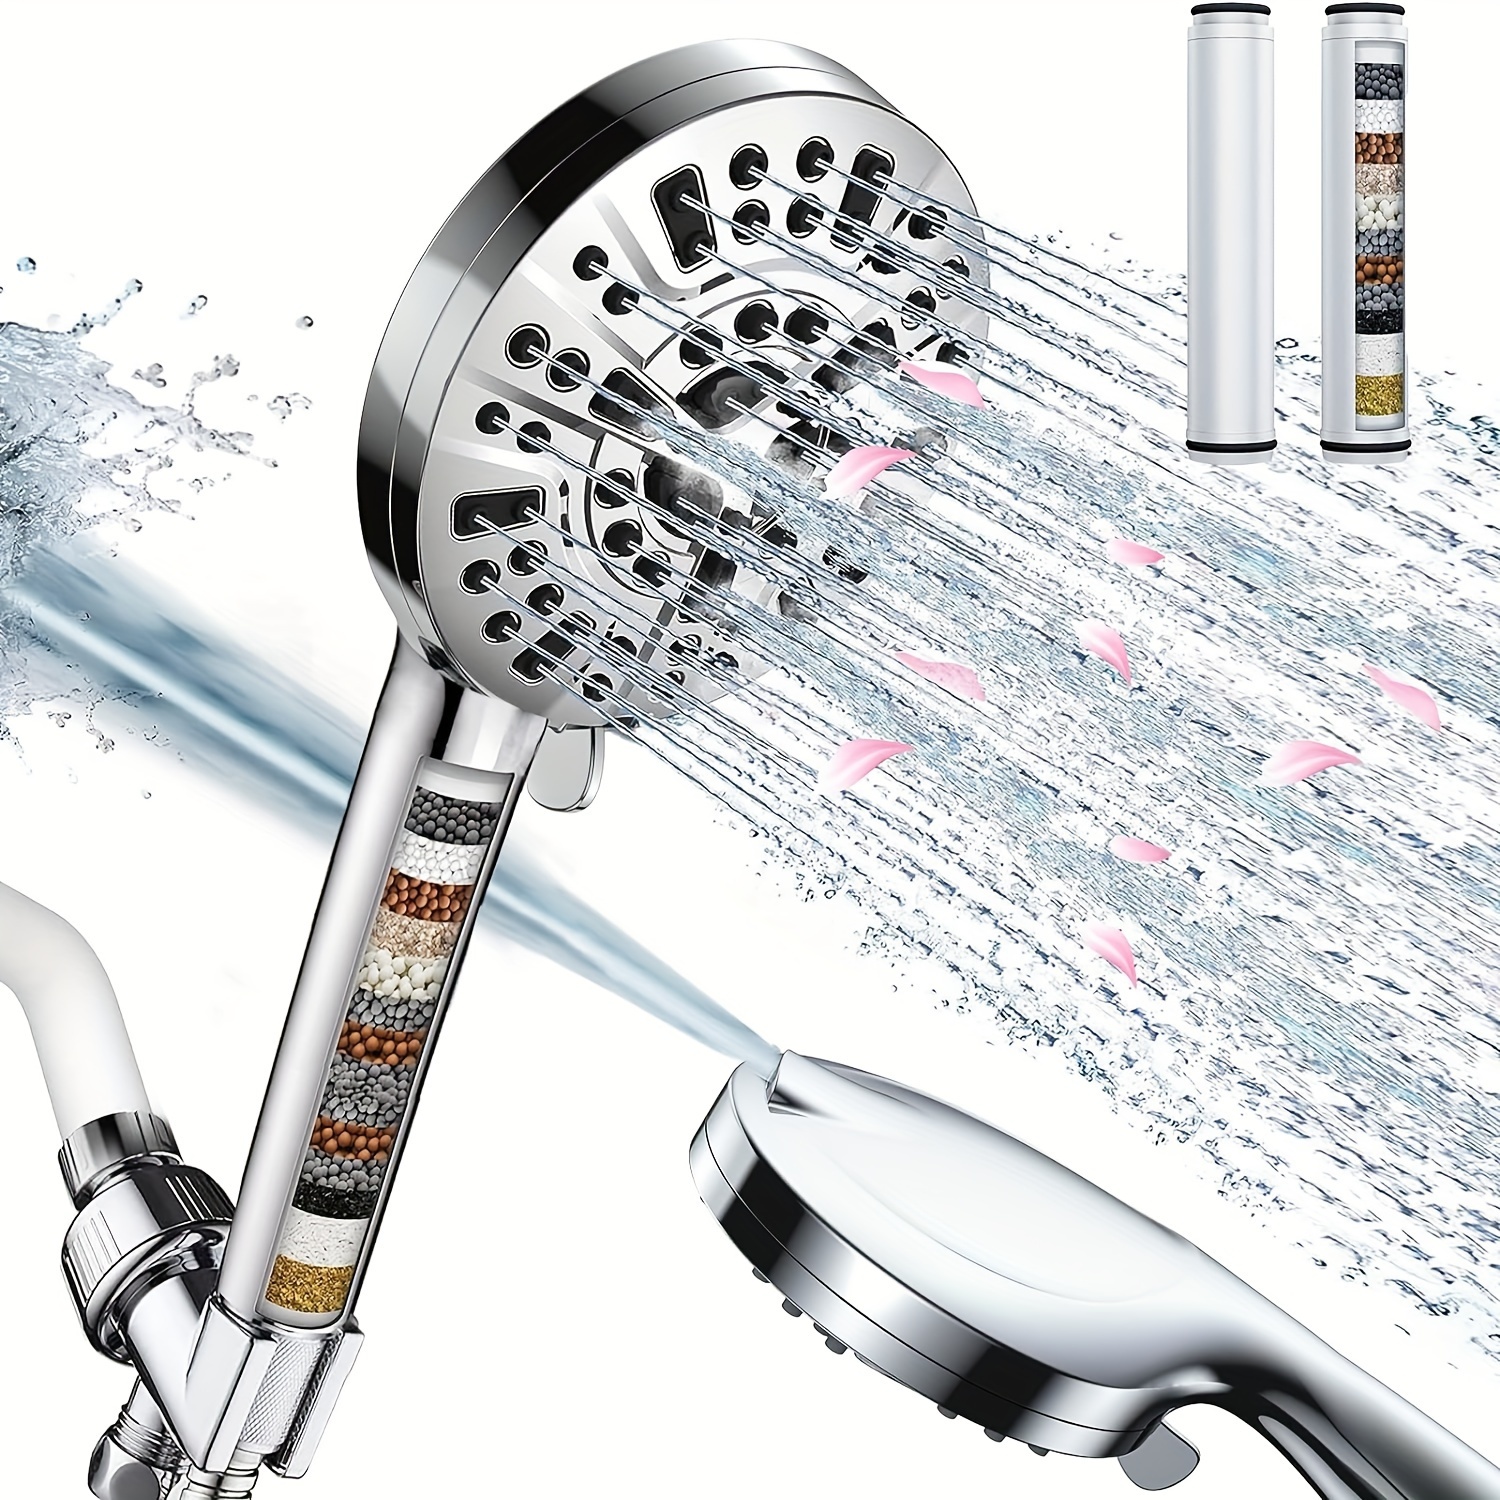 

Shower Heads With Handheld 10 Spray Combo, High Pressure Shower Head With 2 Replaceable Filters, Detachable Filtered Shower Head For Hard Water With Stainless Steel Hose, Water Softener Showerhead